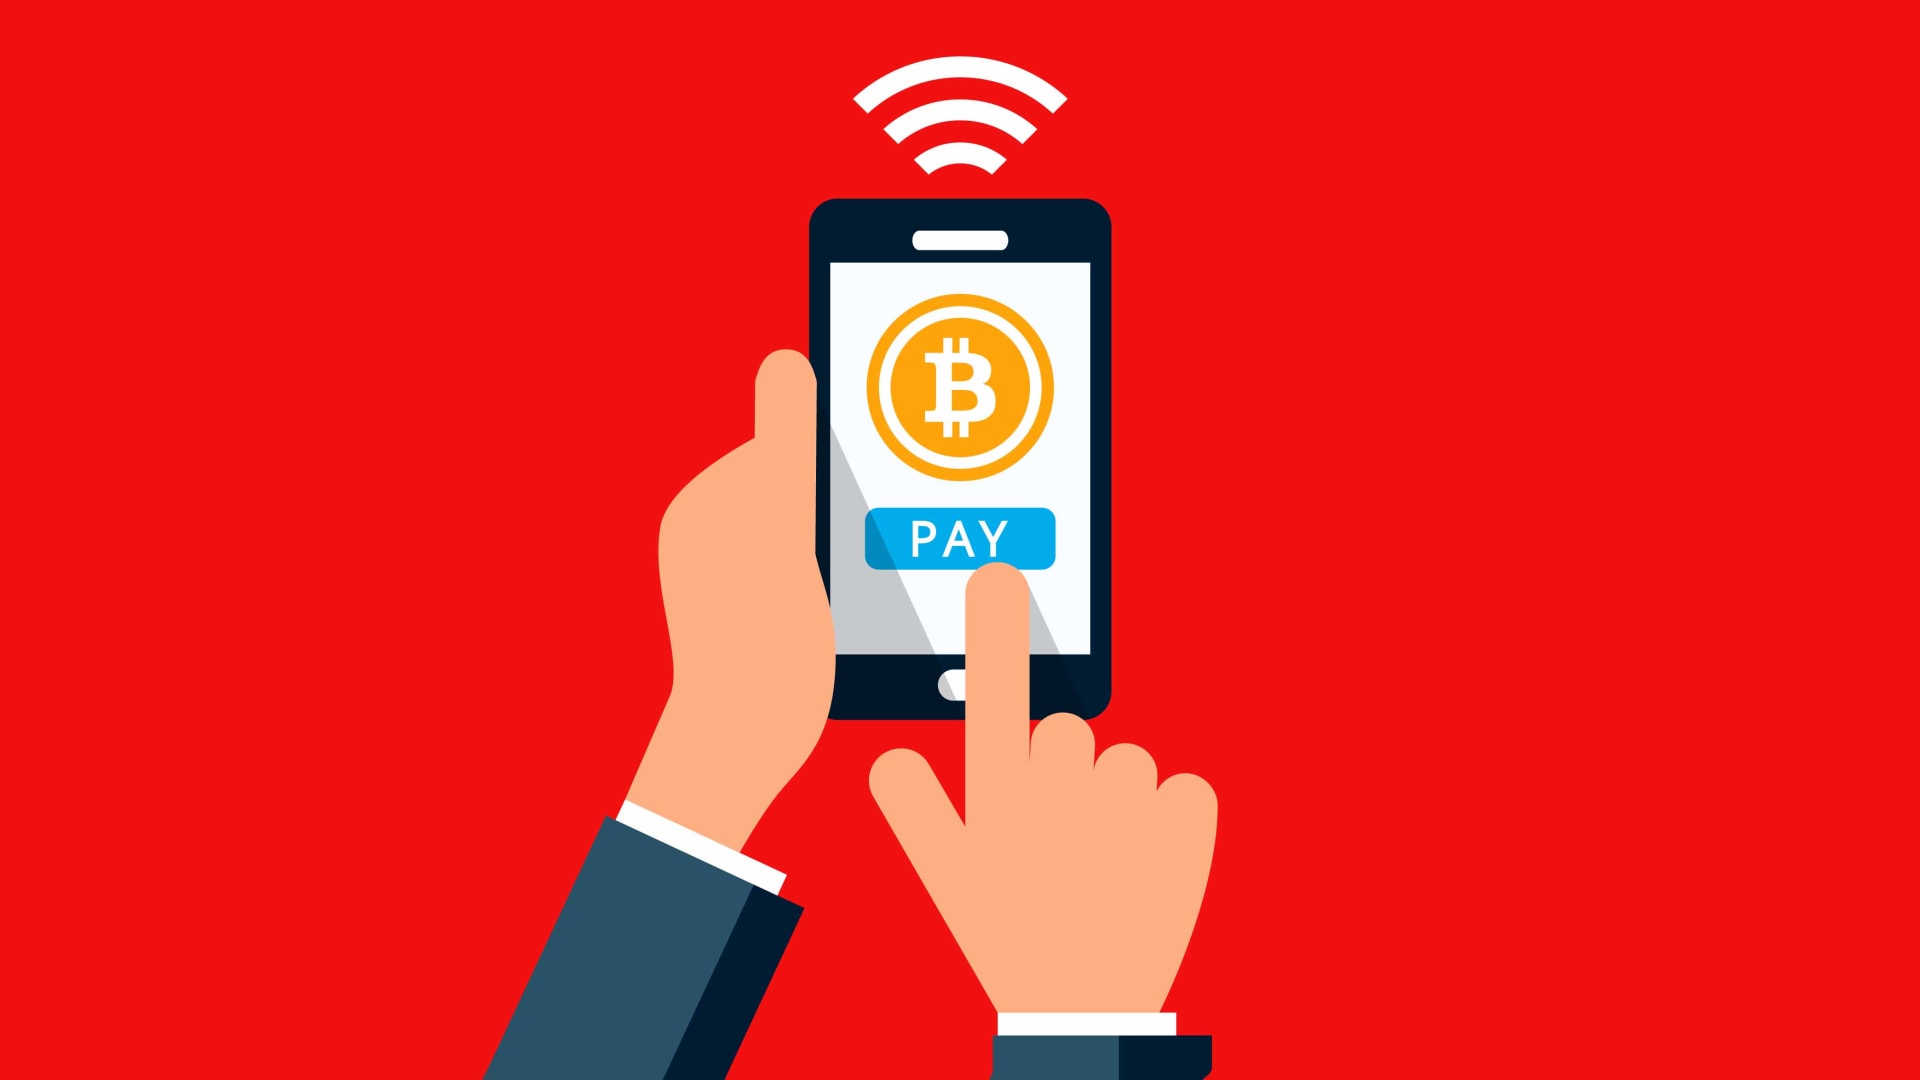 Picture of an animated hand paying with bitcoin on a mobile phone